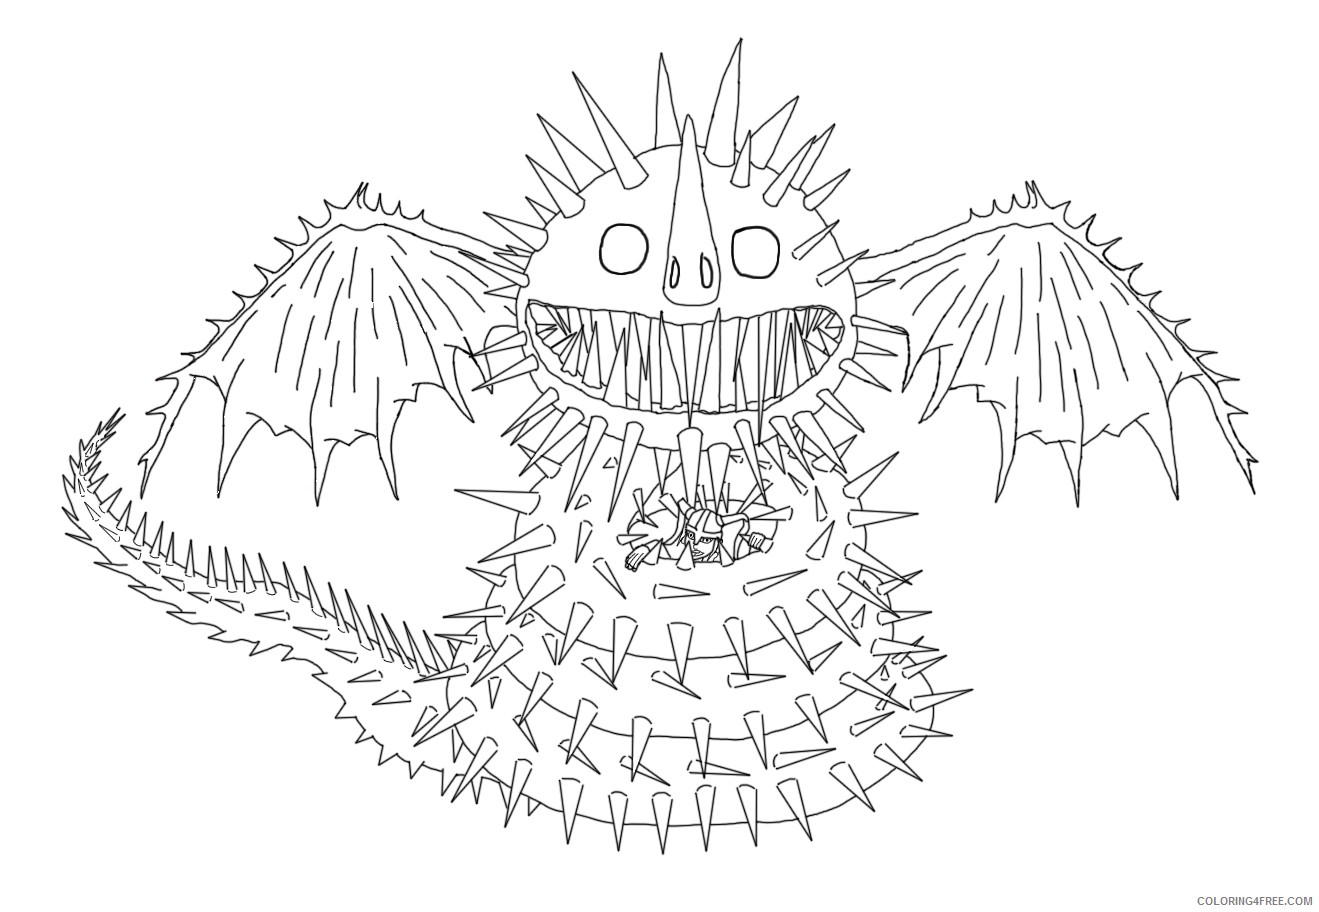 how to train your dragon coloring pages screaming death dragon Coloring4free